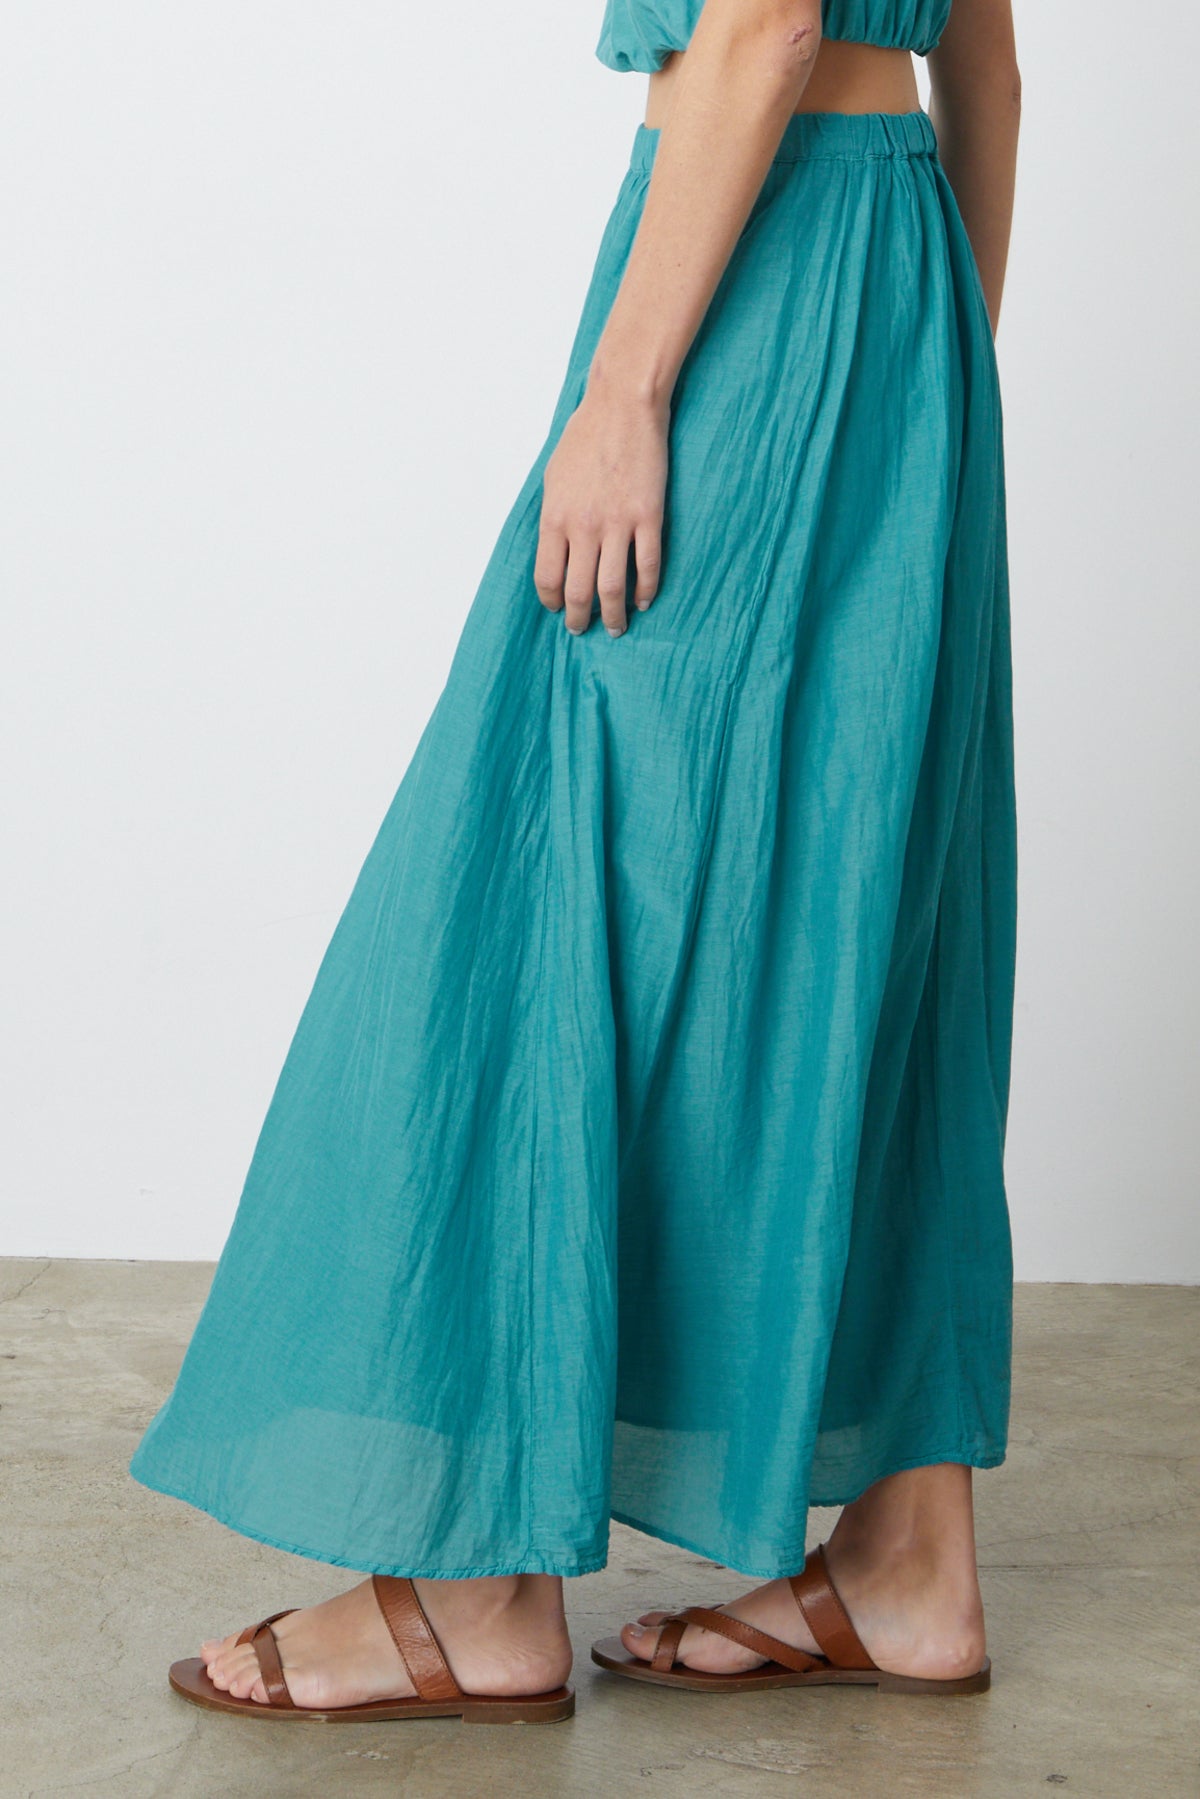 A woman wearing a Mariela Maxi Skirt by Velvet by Graham & Spencer and sandals.-26262258254017